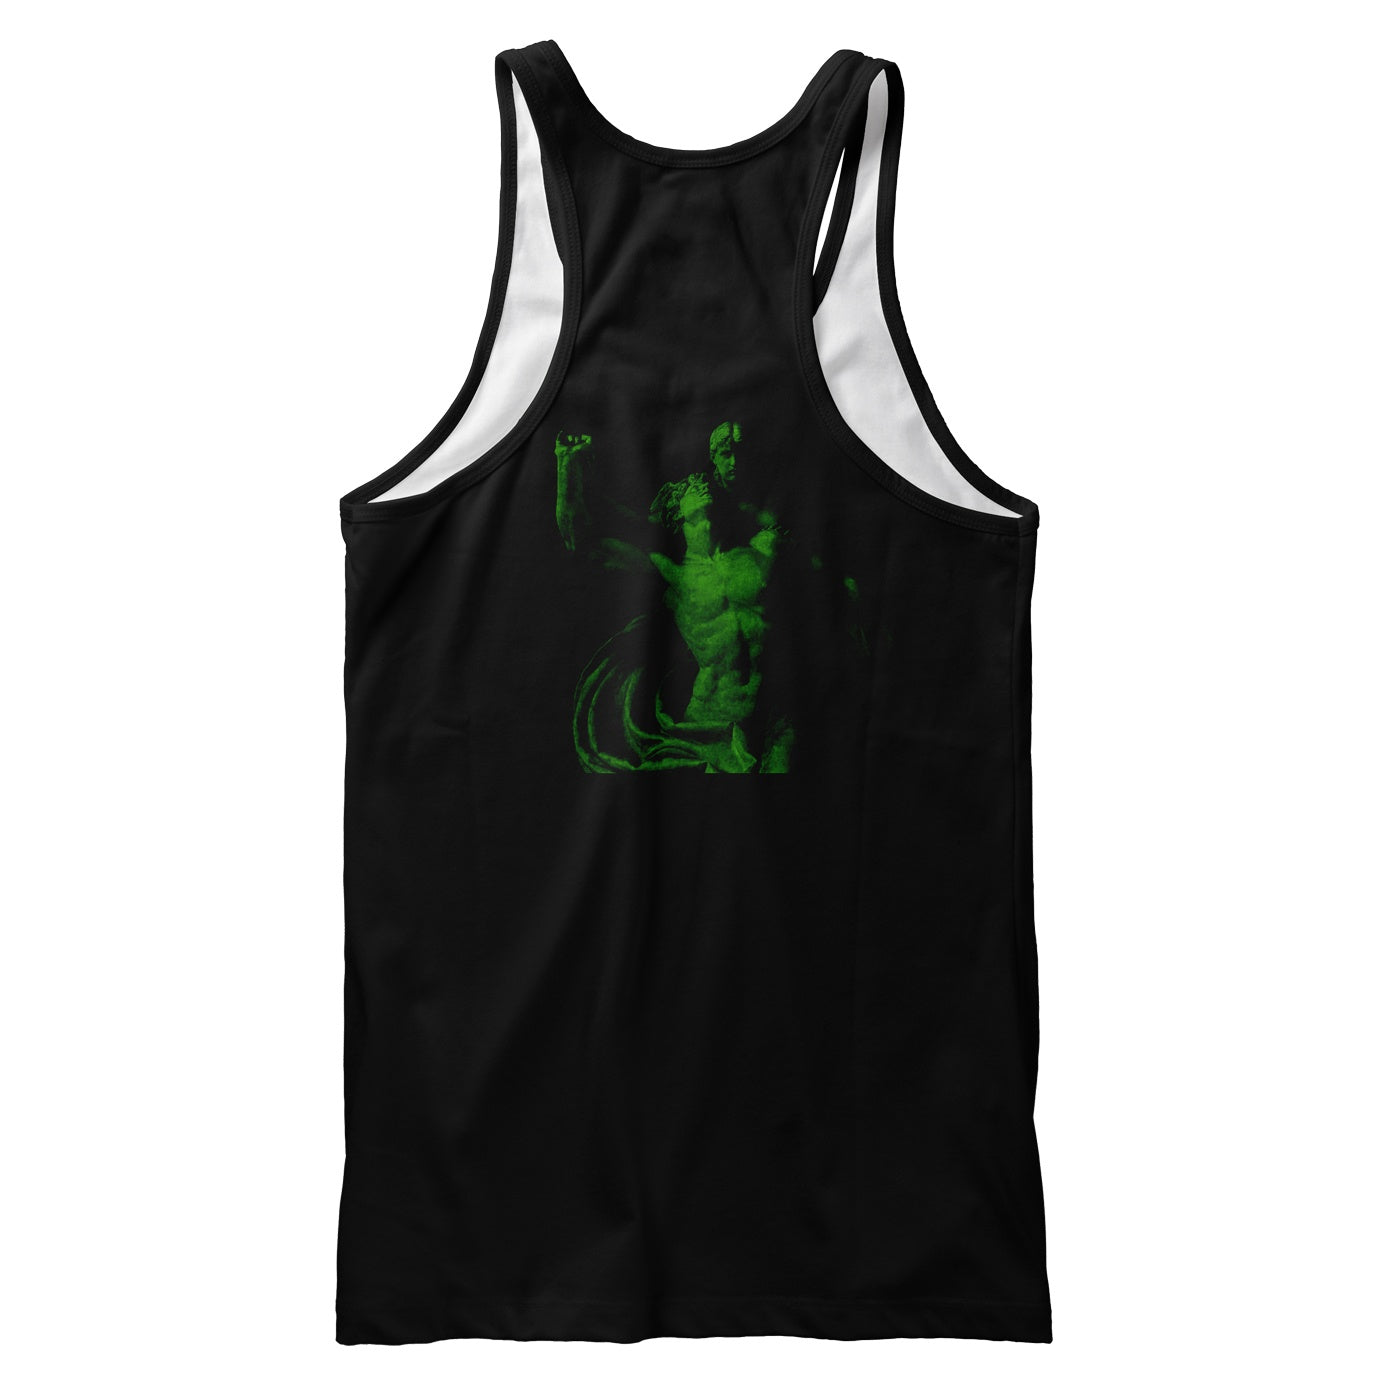 Fixed Form Tank Top